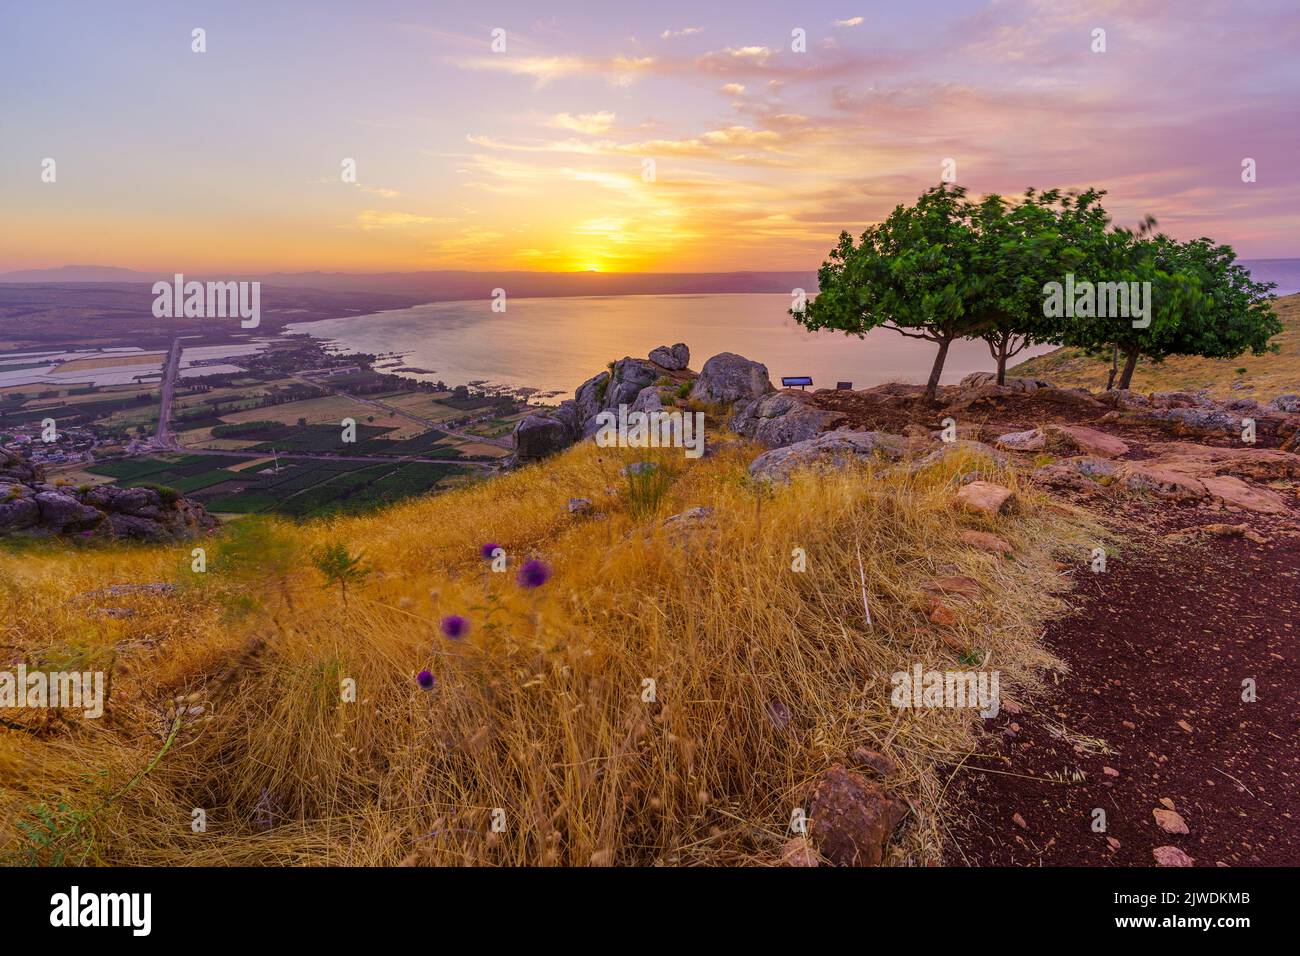 Sunrise view of the Sea of Galilee, from Mount Arbel (west side). Northern Israel. With long exposure of trees moving in strong winds Stock Photo